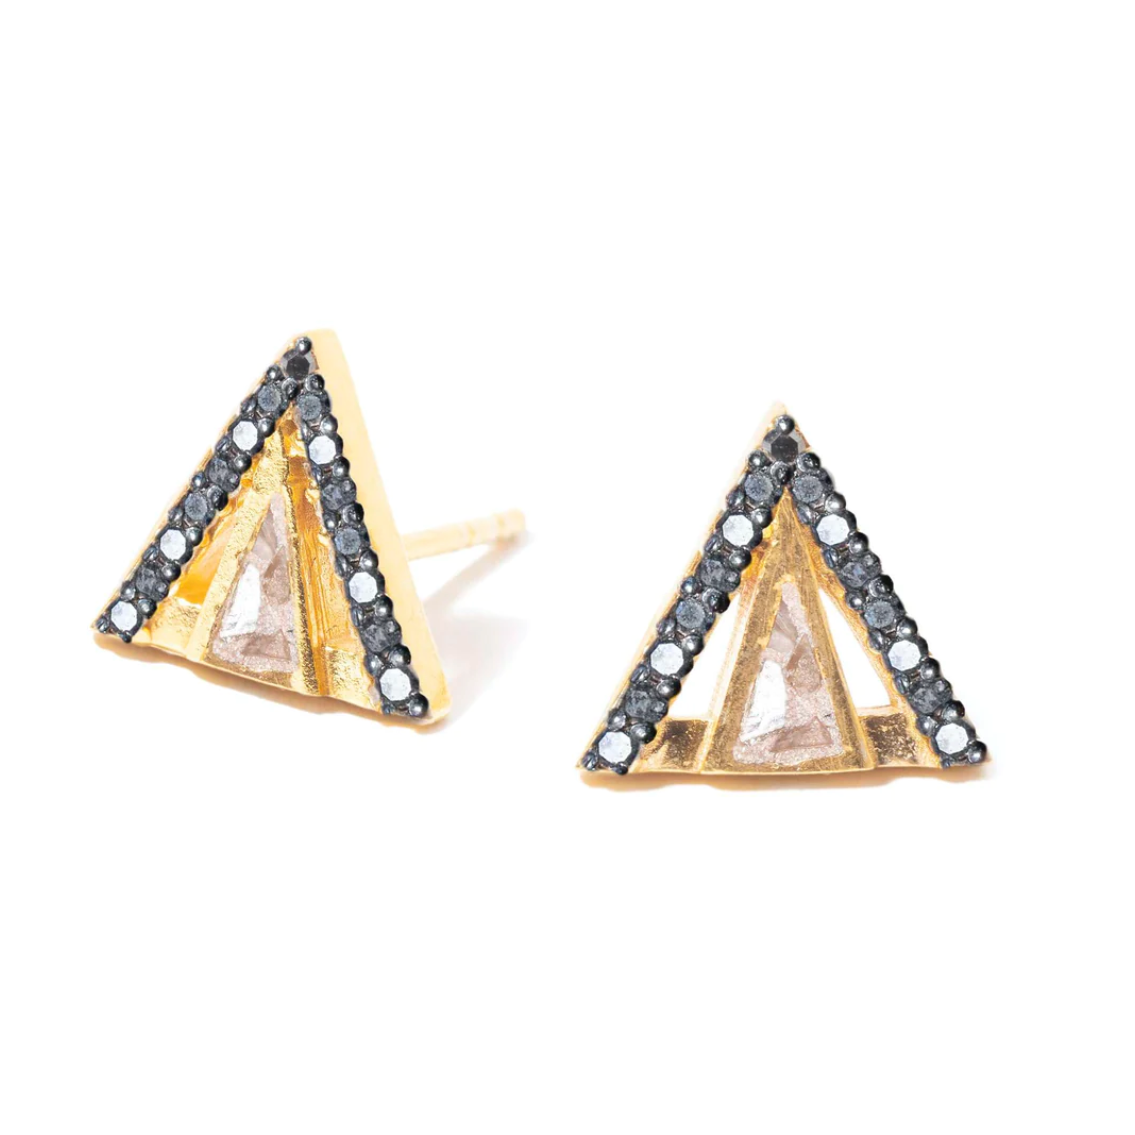 Load image into Gallery viewer, triangle shaped stud earrings with crushed diamonds set in resin and black diamond pave accents on white background
